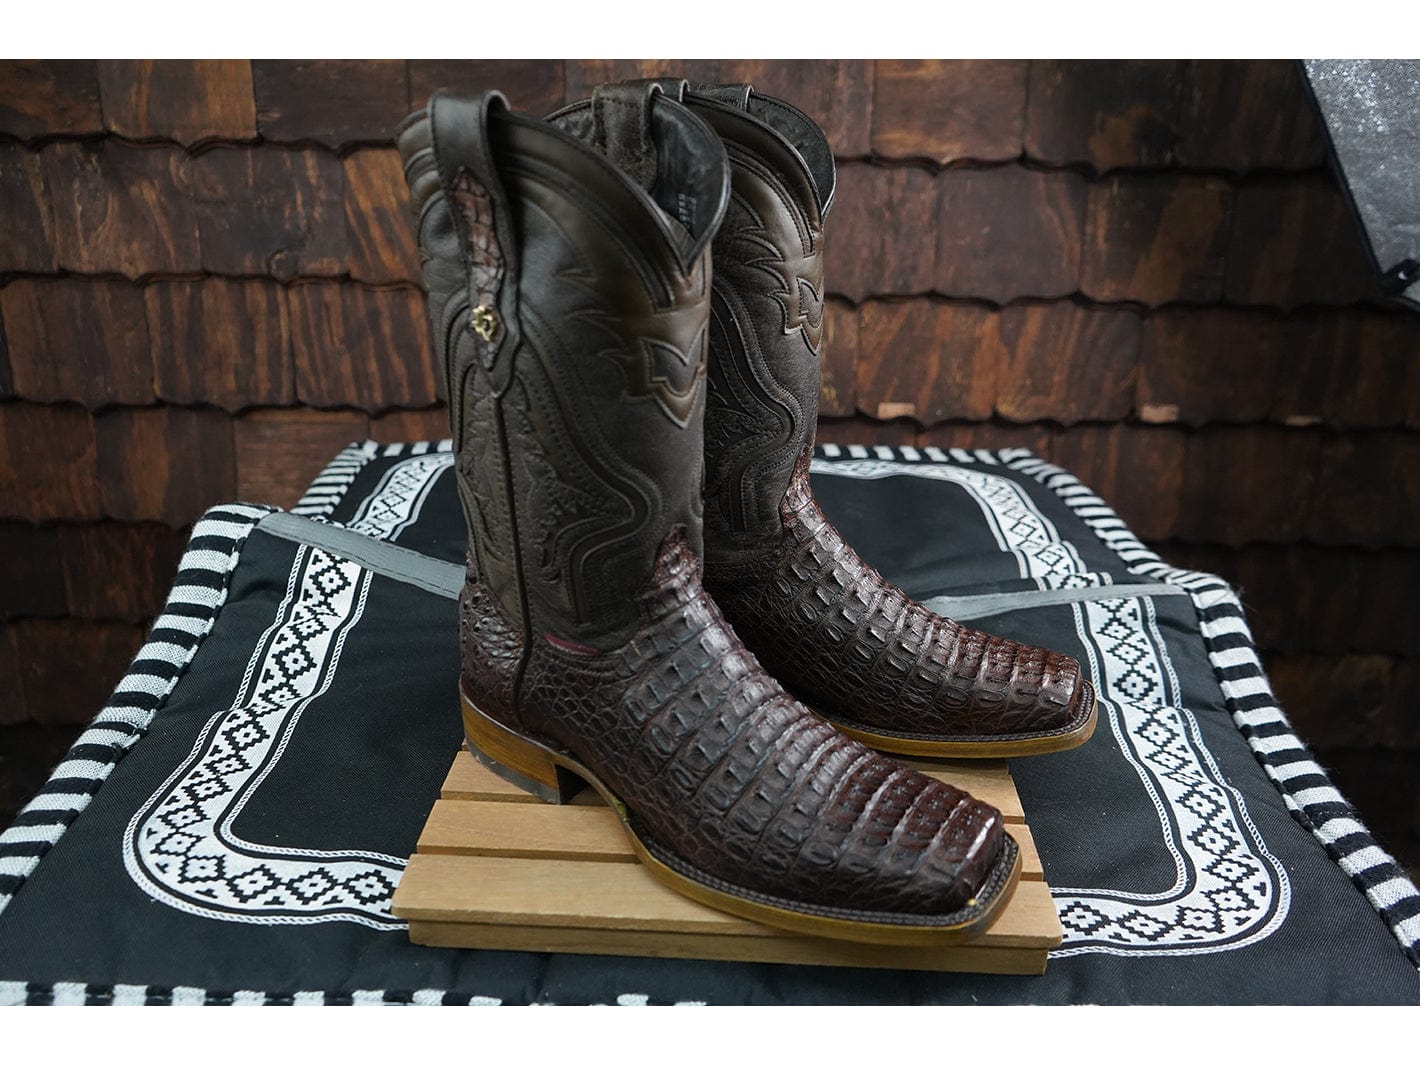 Texas Country Exotic Boot Caiman Kango Tabaco Rodeo Toe LM80